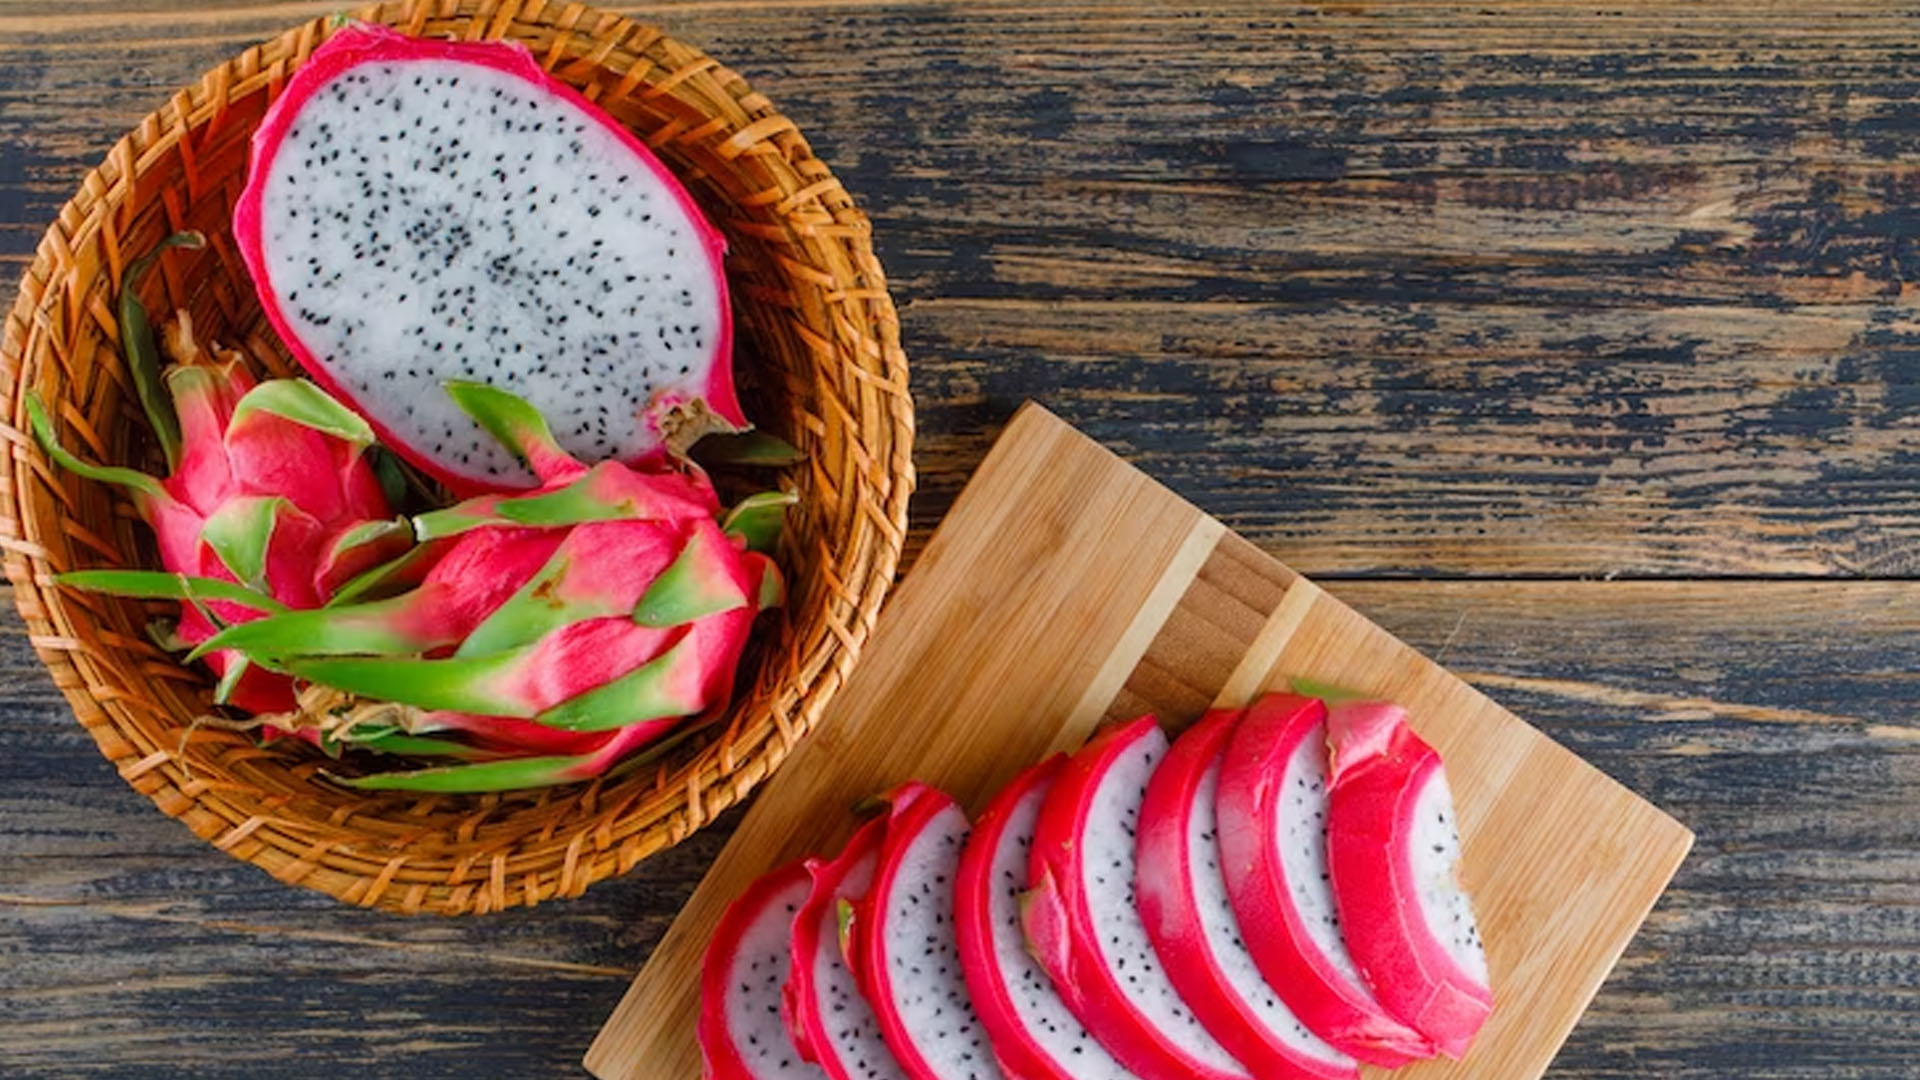 What Are The Health Benefits of Pitaya?